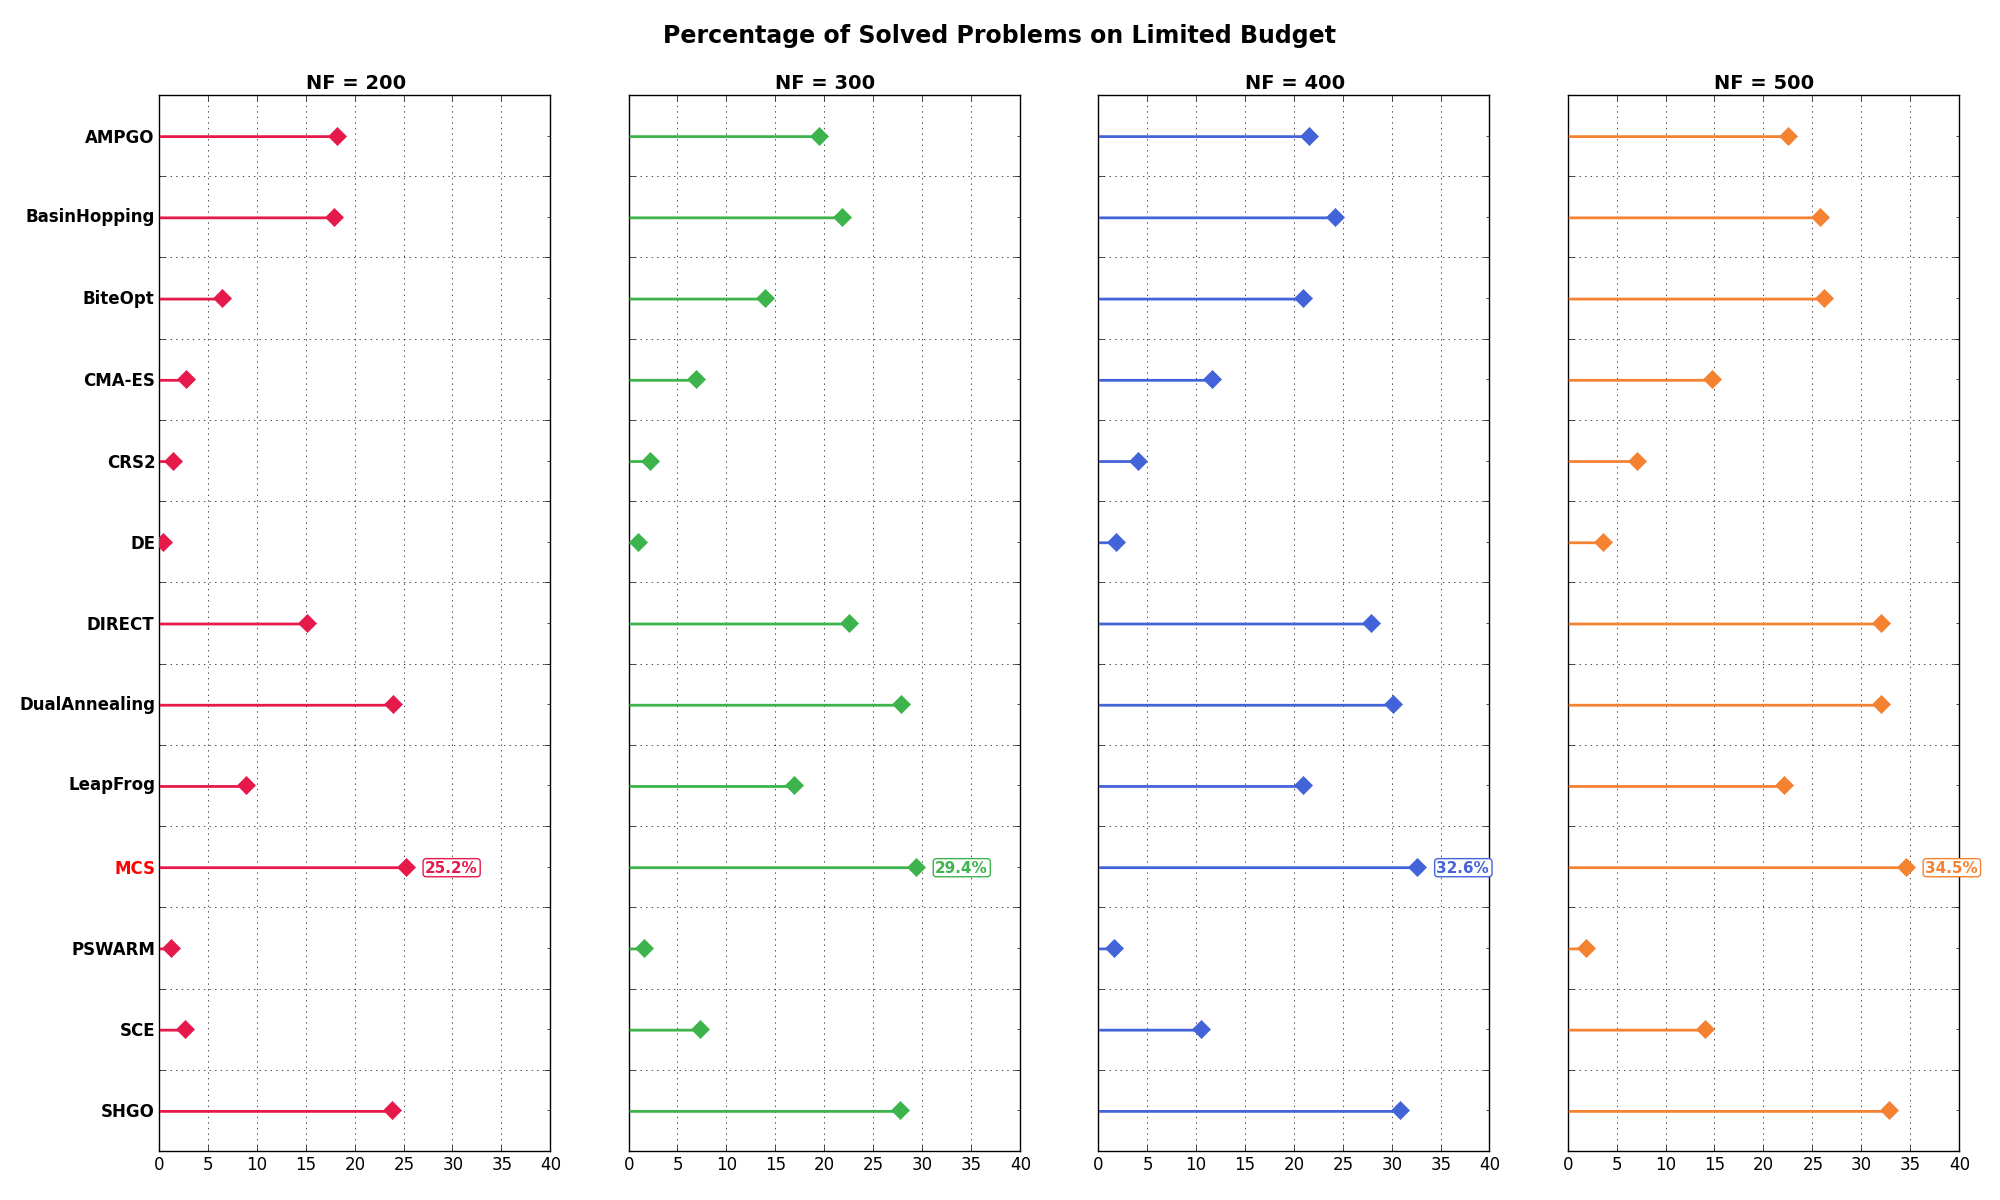 Percentage of problems solved, per solver, at limited budget